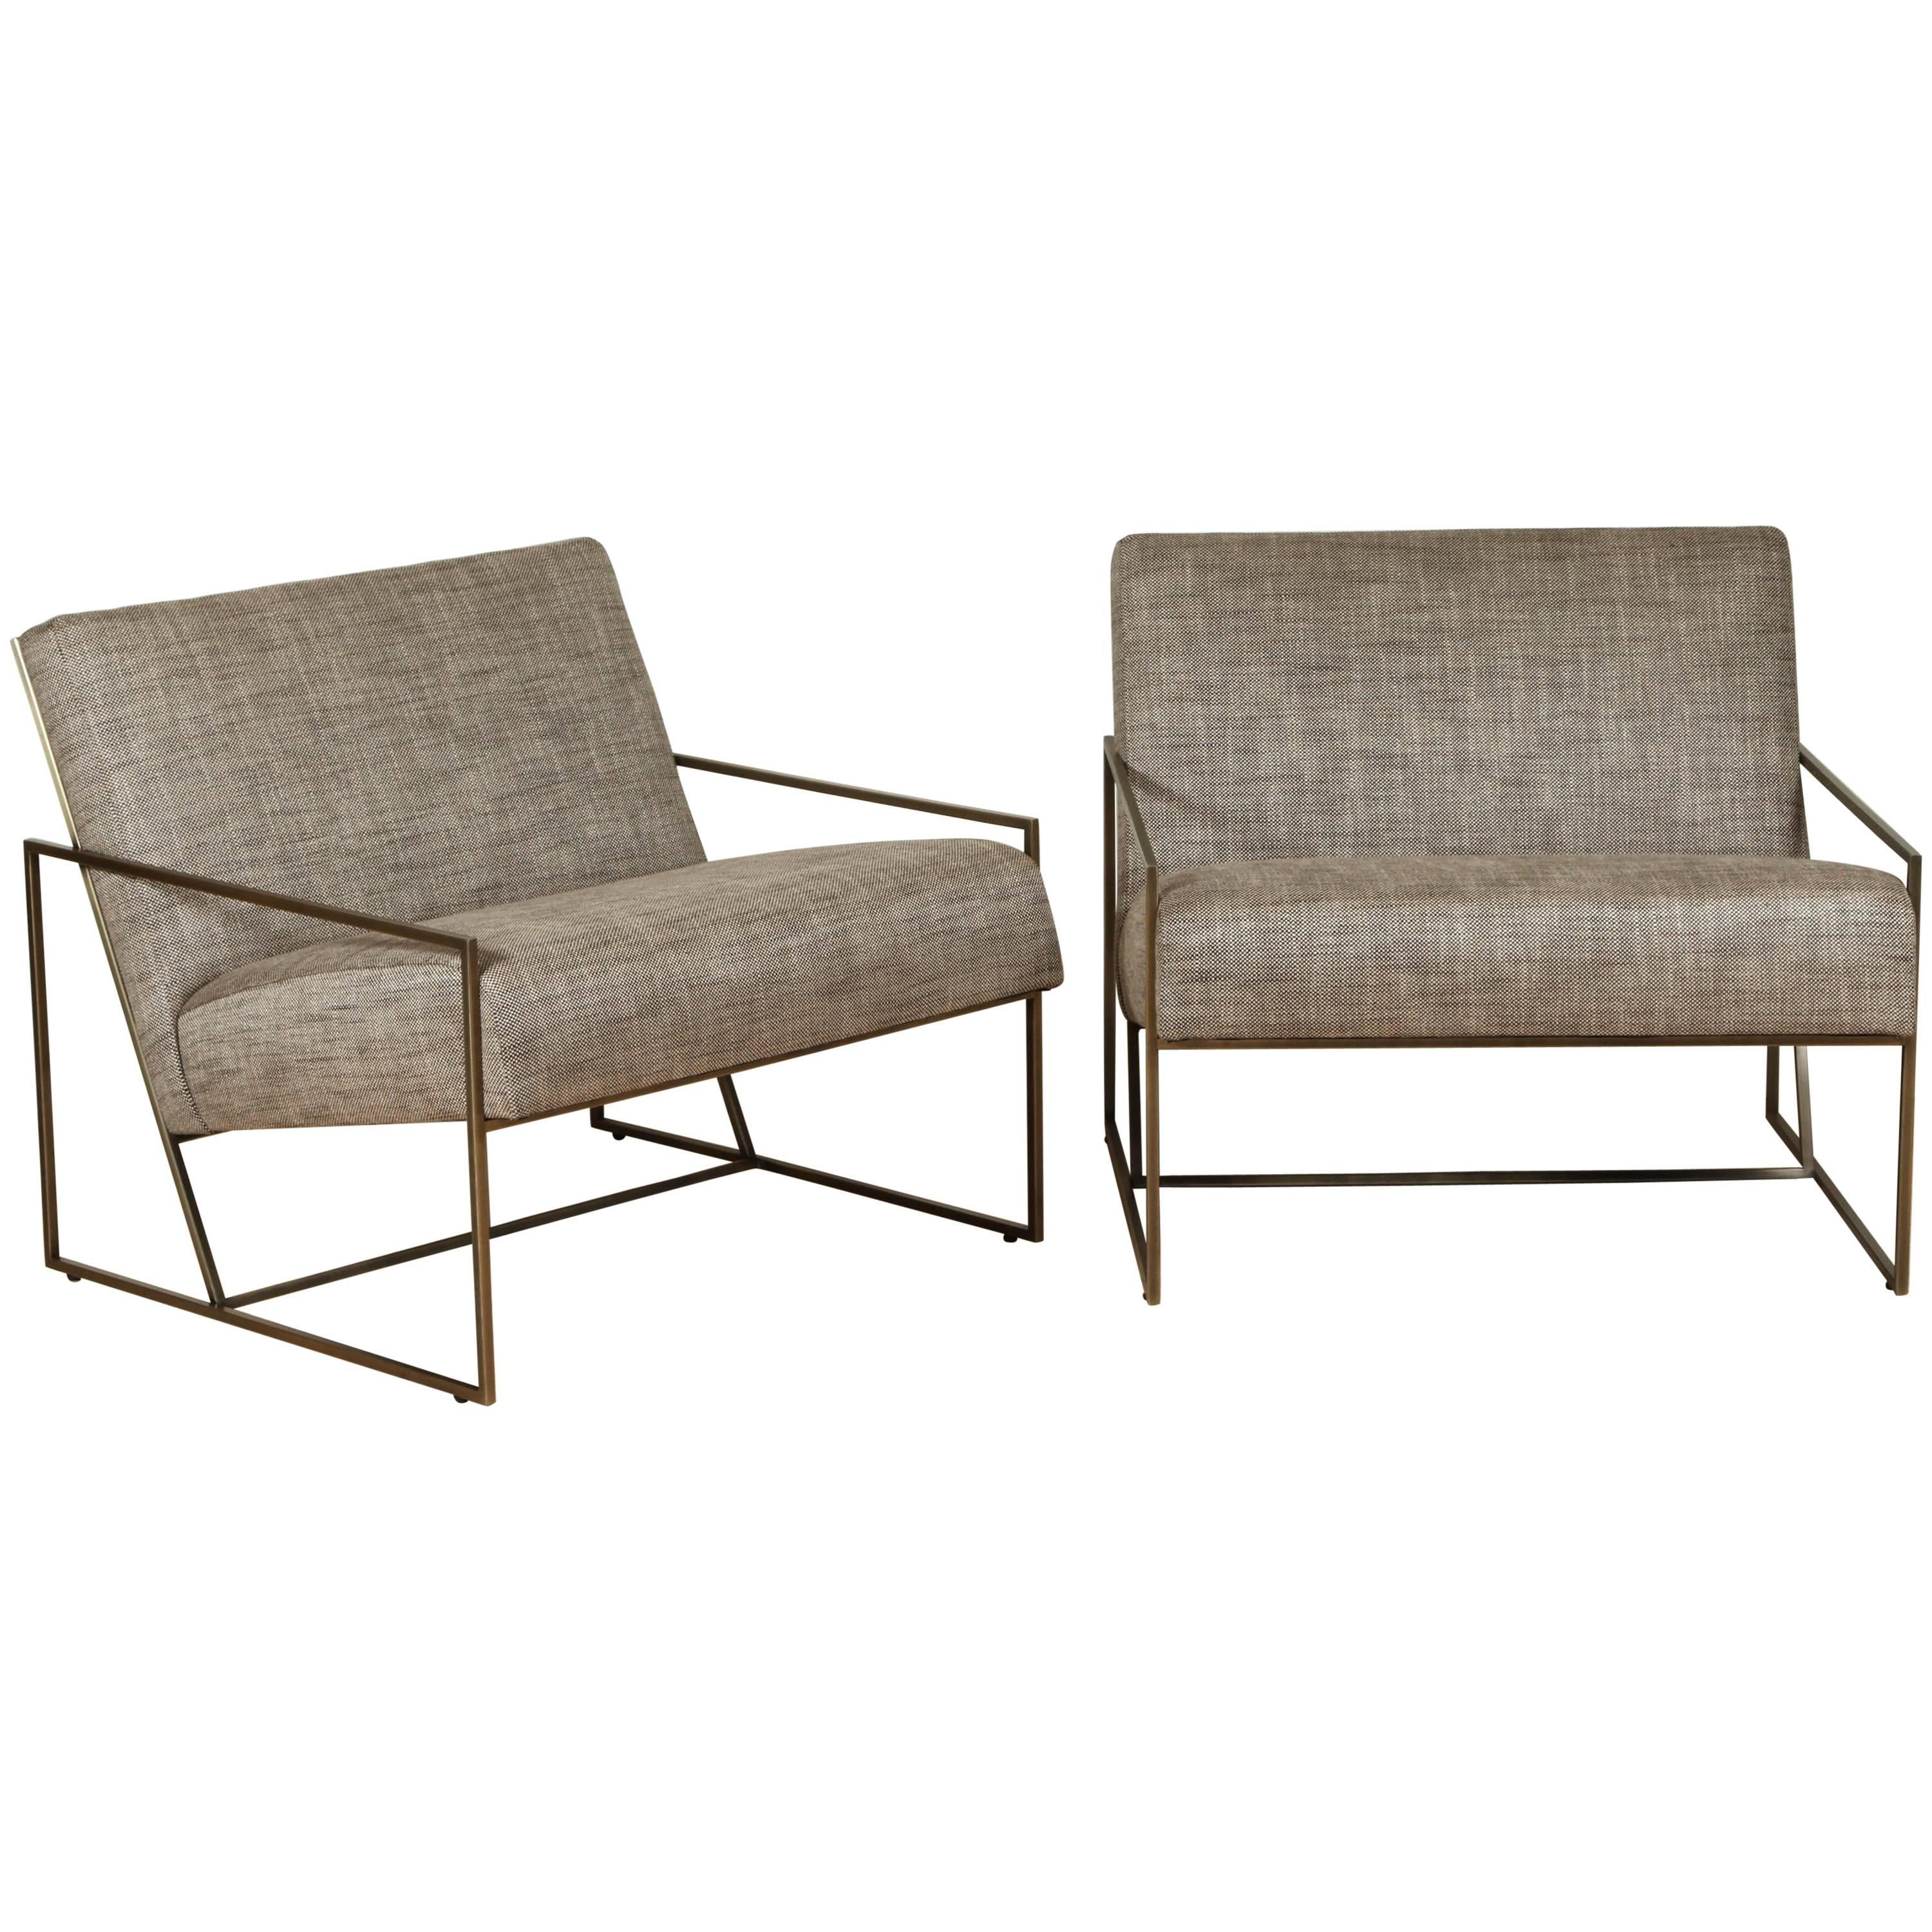 Thin Frame Lounge Chairs by Lawson-Fenning 